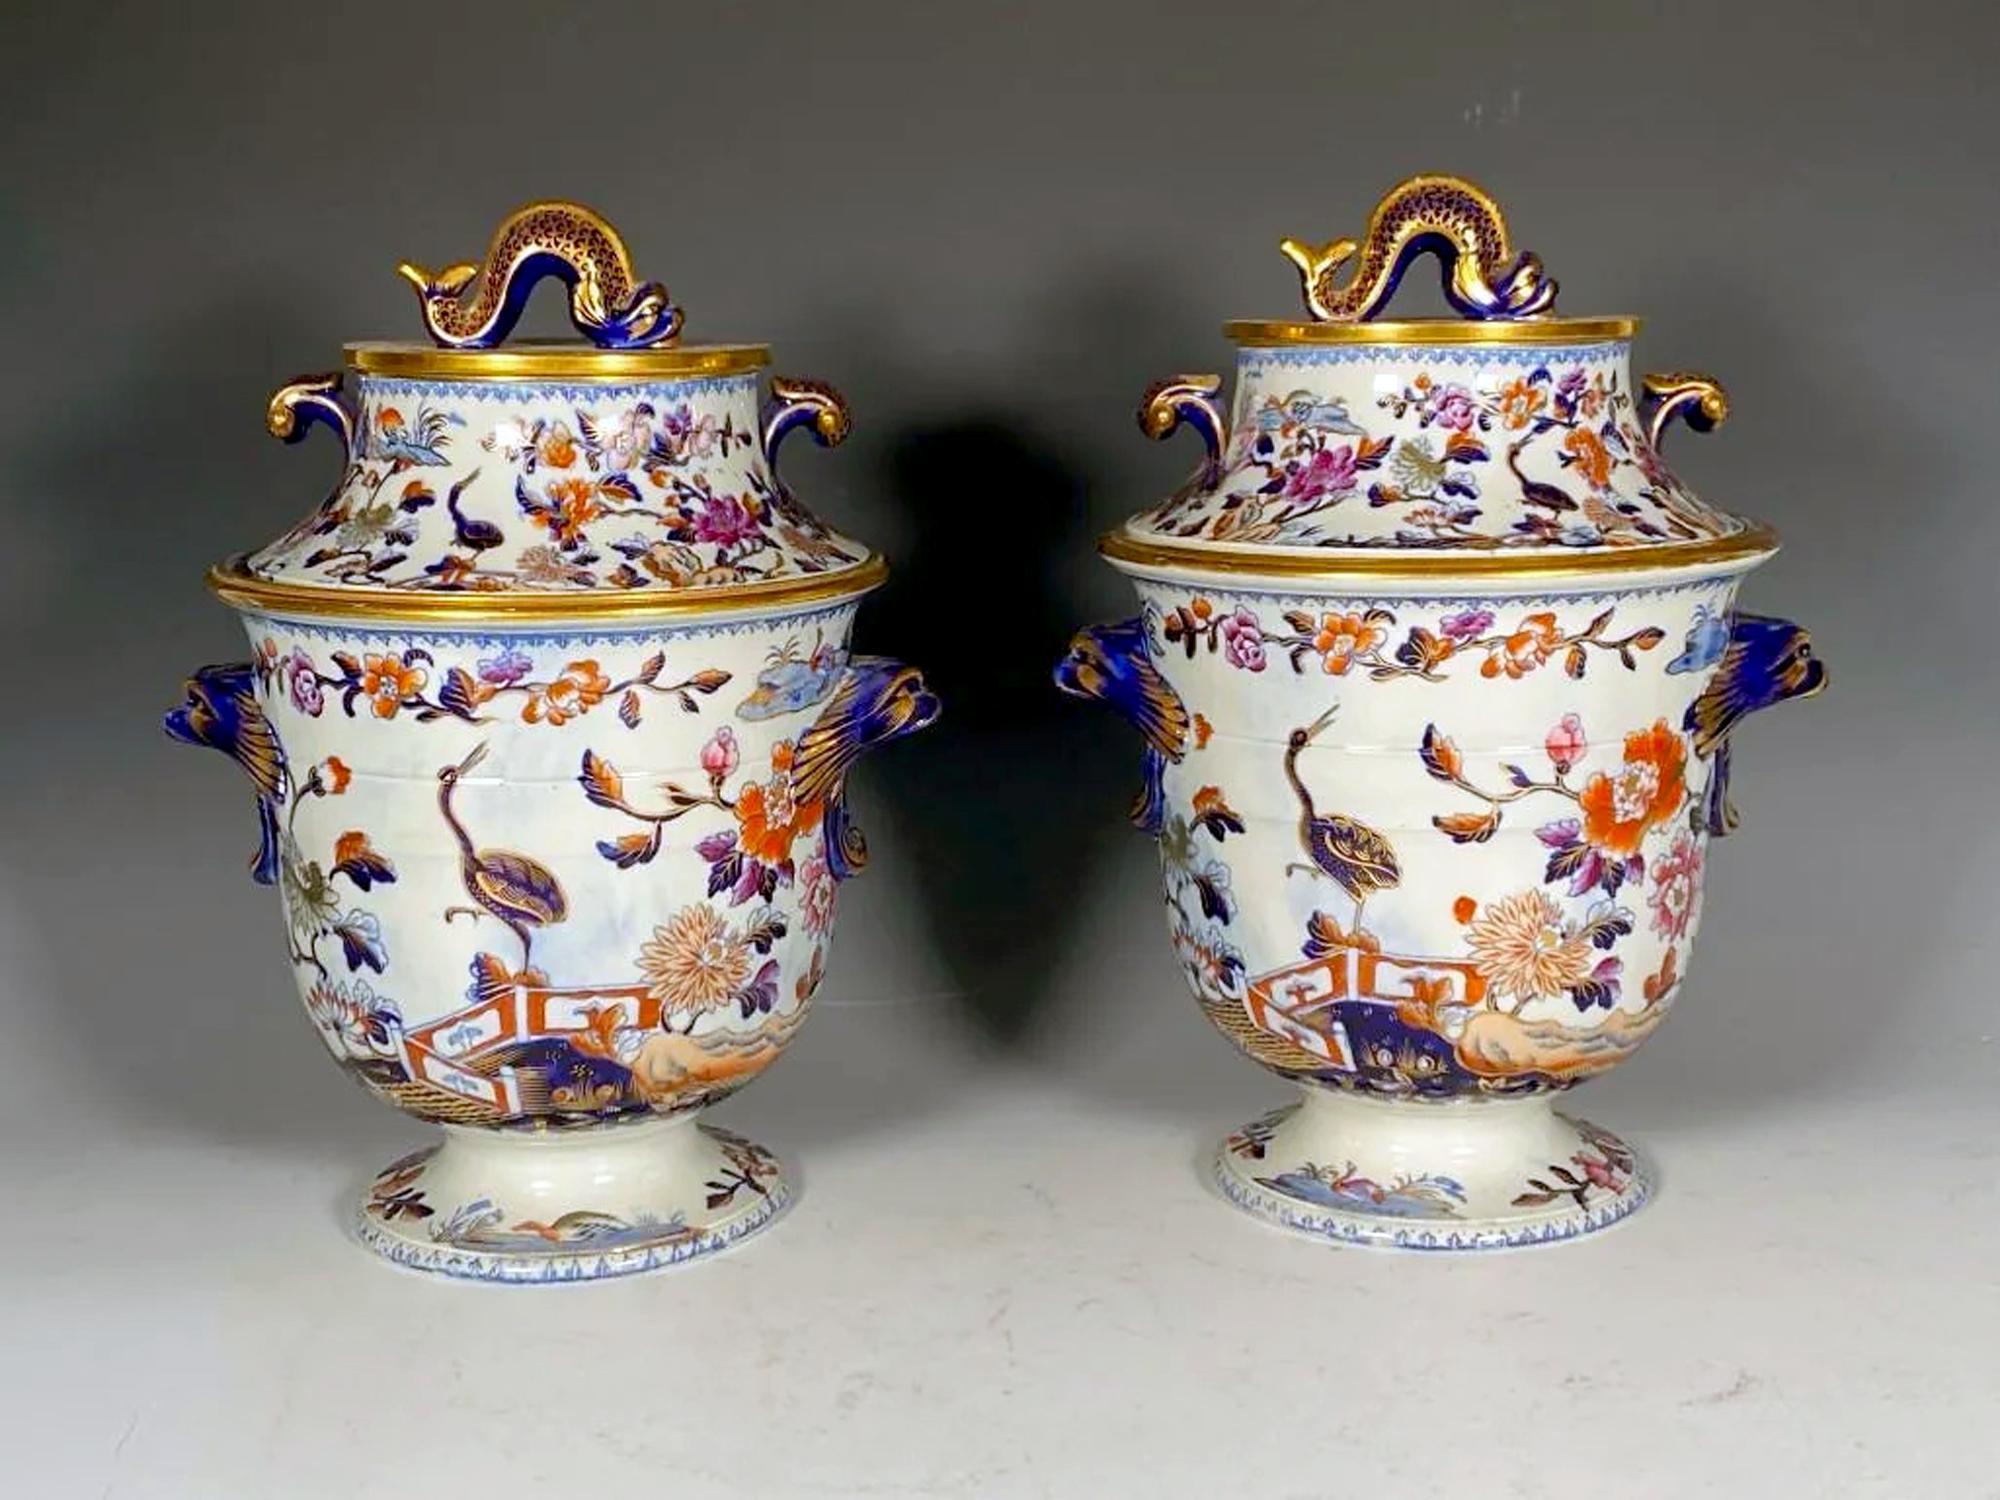 Georgian Davenport Imari stone China Chinoiserie fruit coolers,
Stork Pattern,
1805-20

The Davenport Stone China or ironstone fruit coolers are each in four parts, each with an ice pail, liner, collar, and cover. They are decorated in a pattern